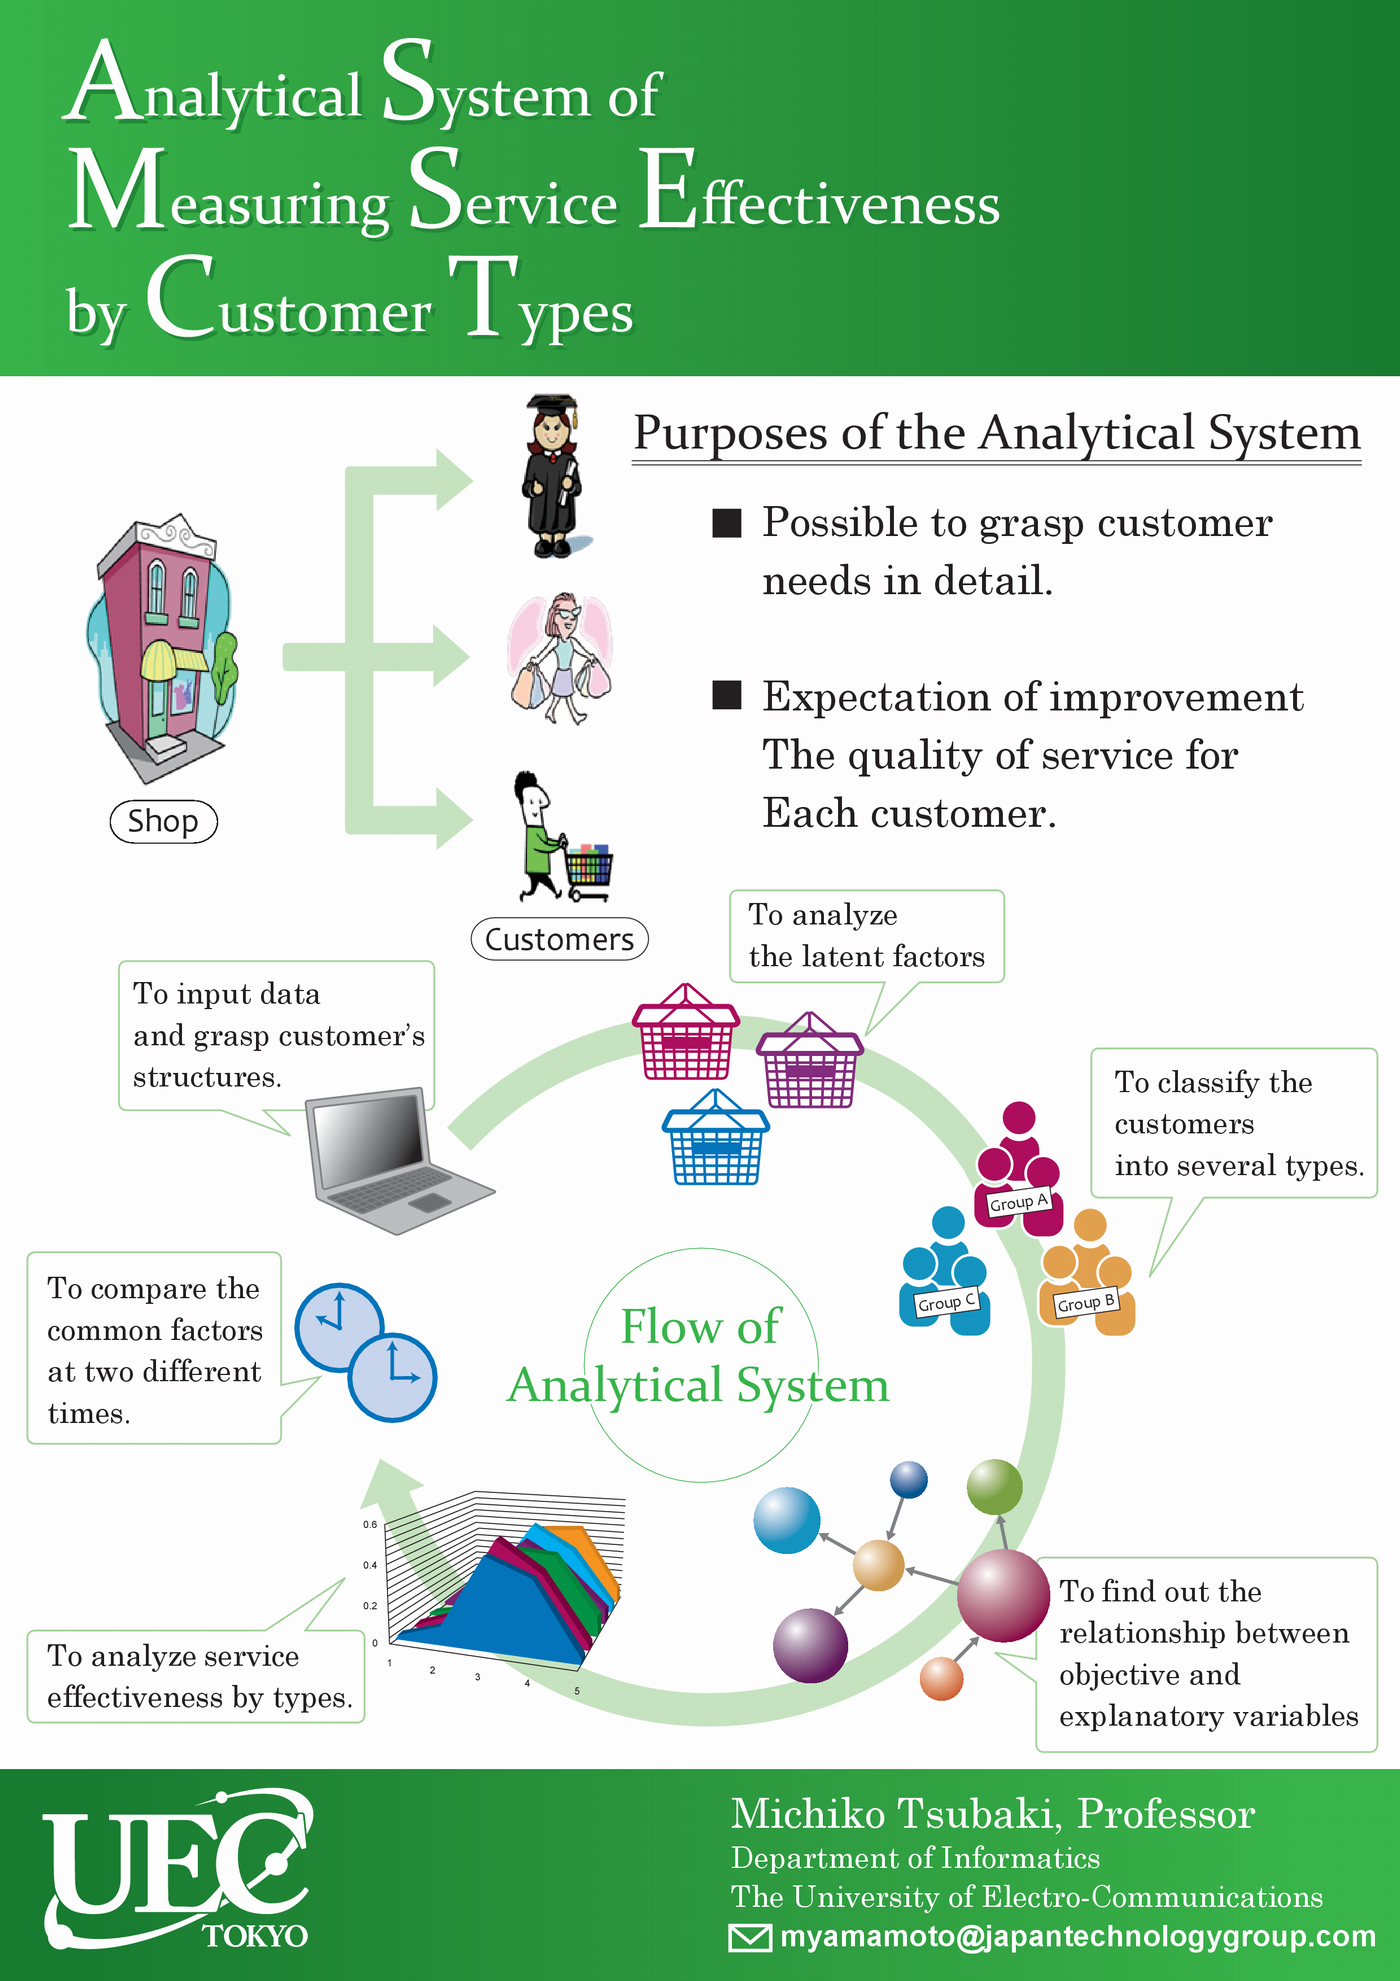 Advanced analytical service science based on big data